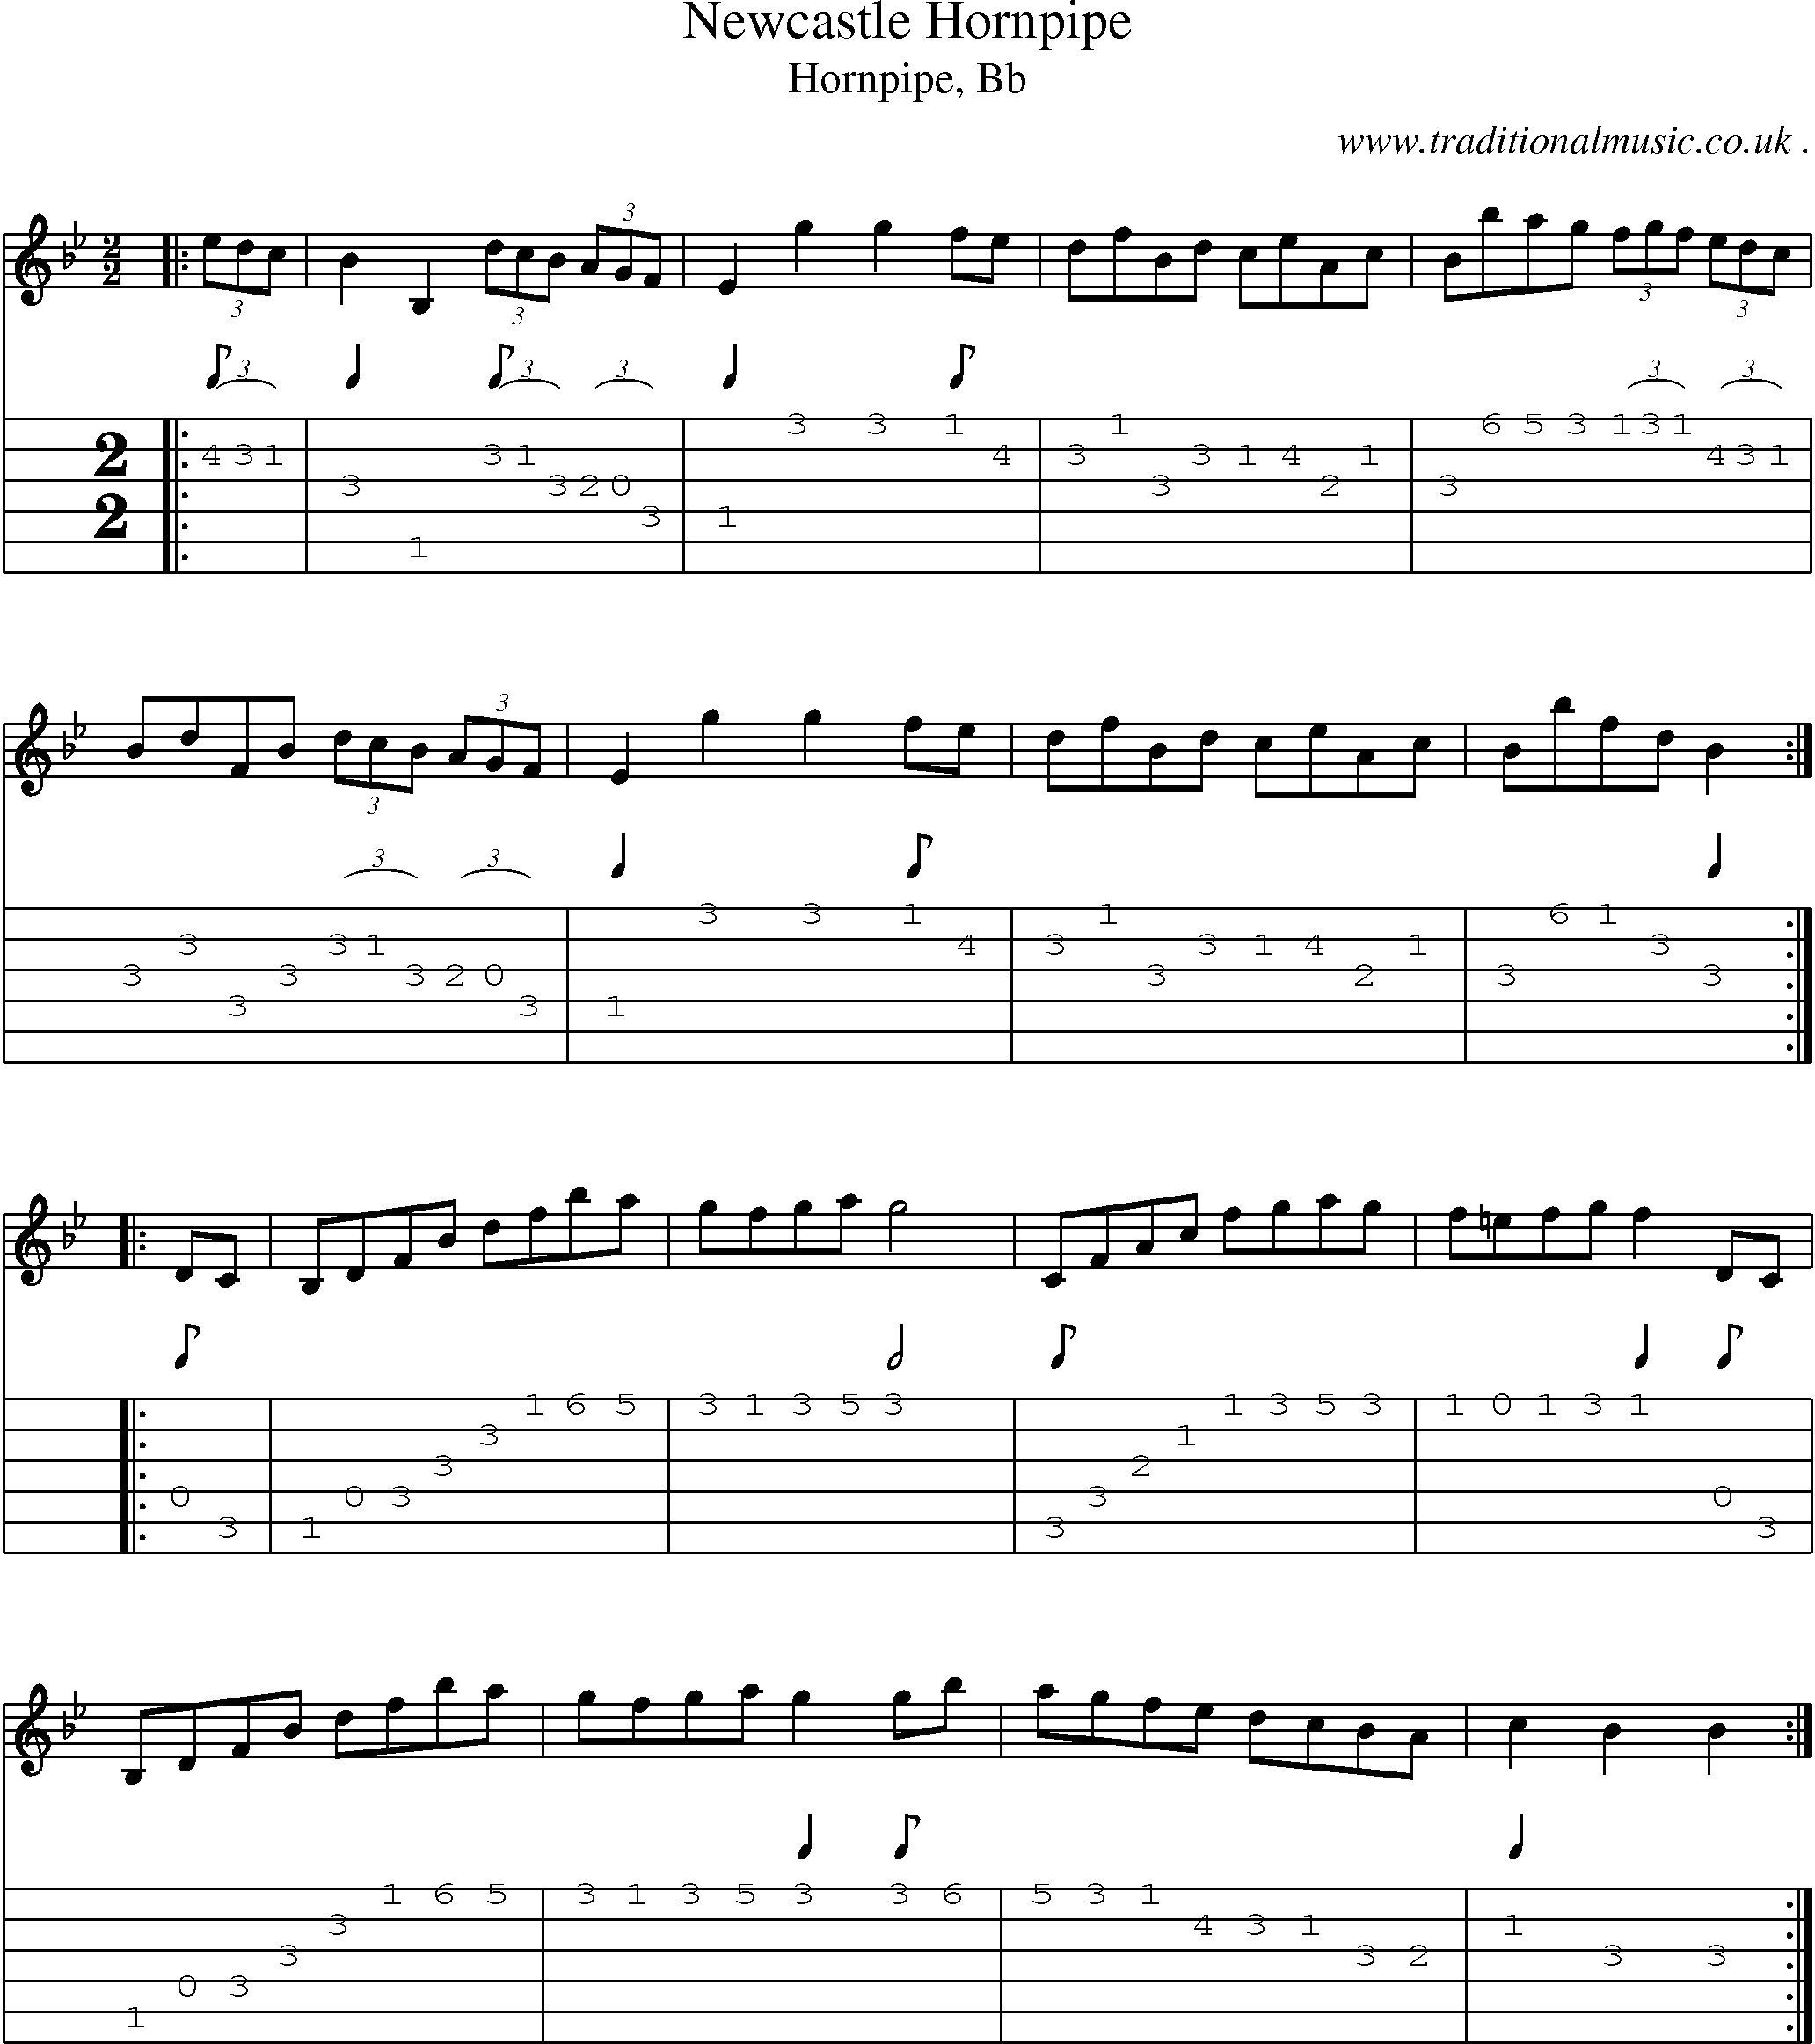 Sheet-music  score, Chords and Guitar Tabs for Newcastle Hornpipe